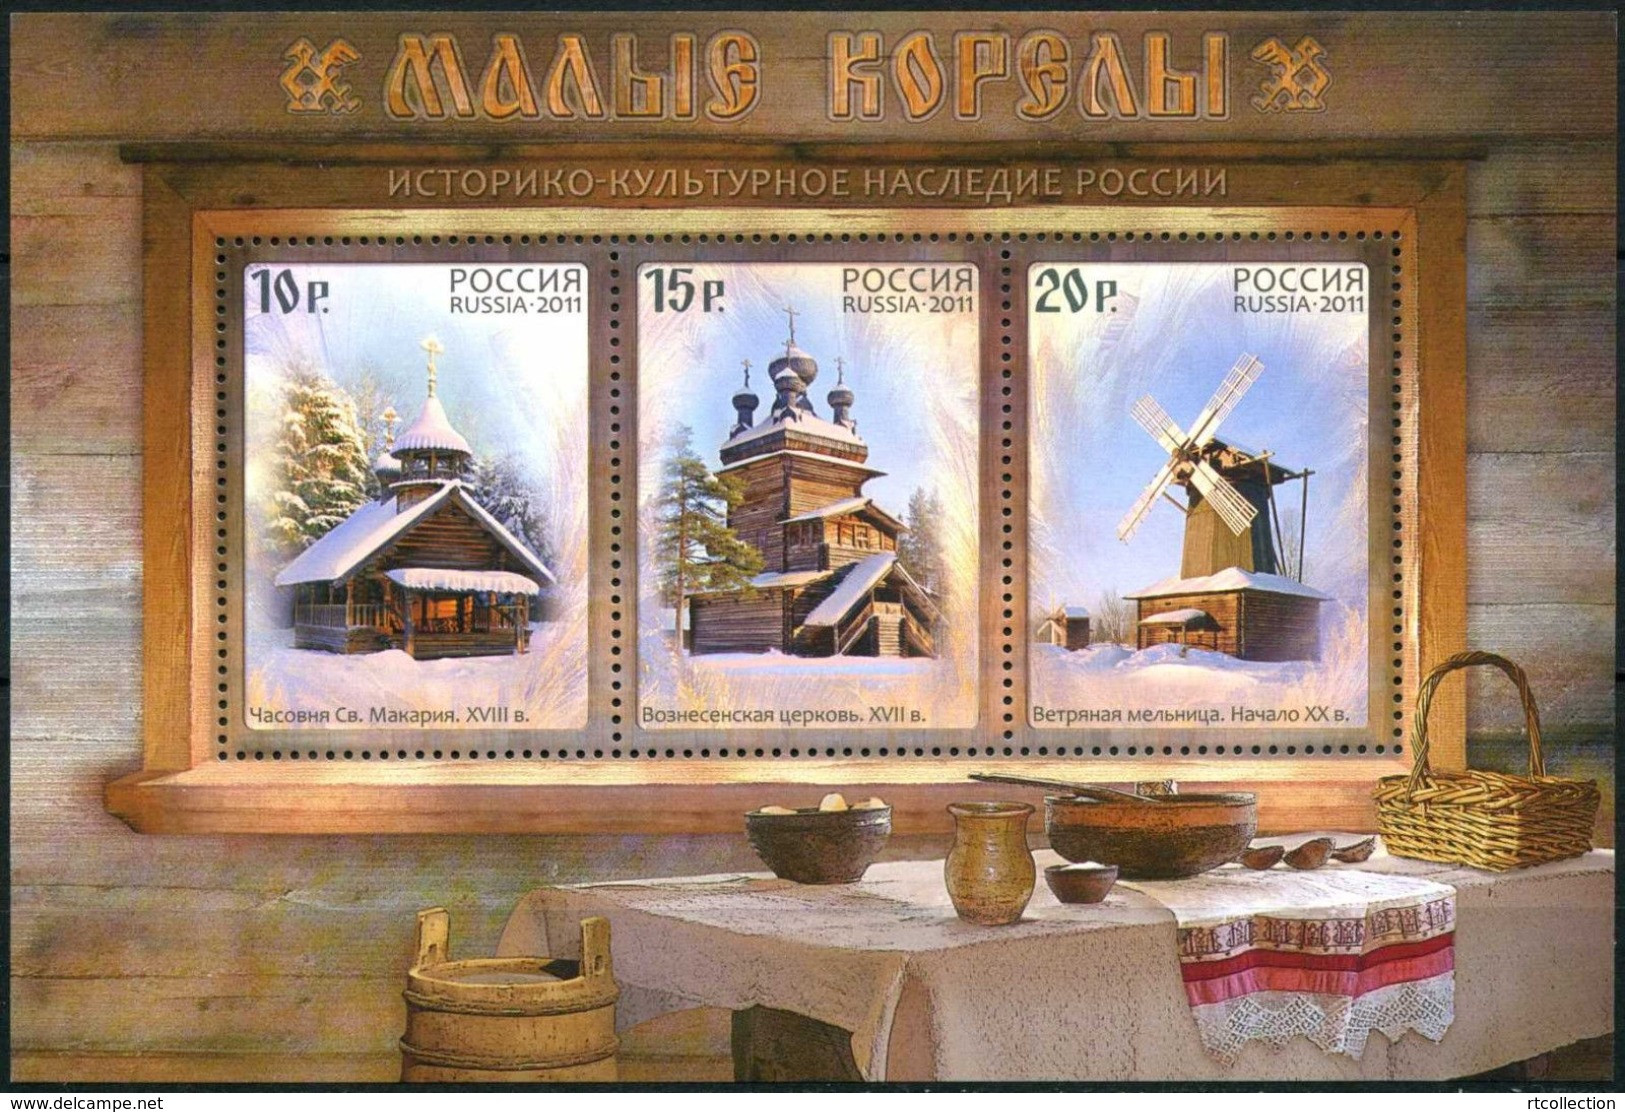 Russia 2011 Souvenir Pack Booklet FDC Museum Wooden Architecture Folk Art Malye Korely Historical Culture Heritage Stamp - Collections